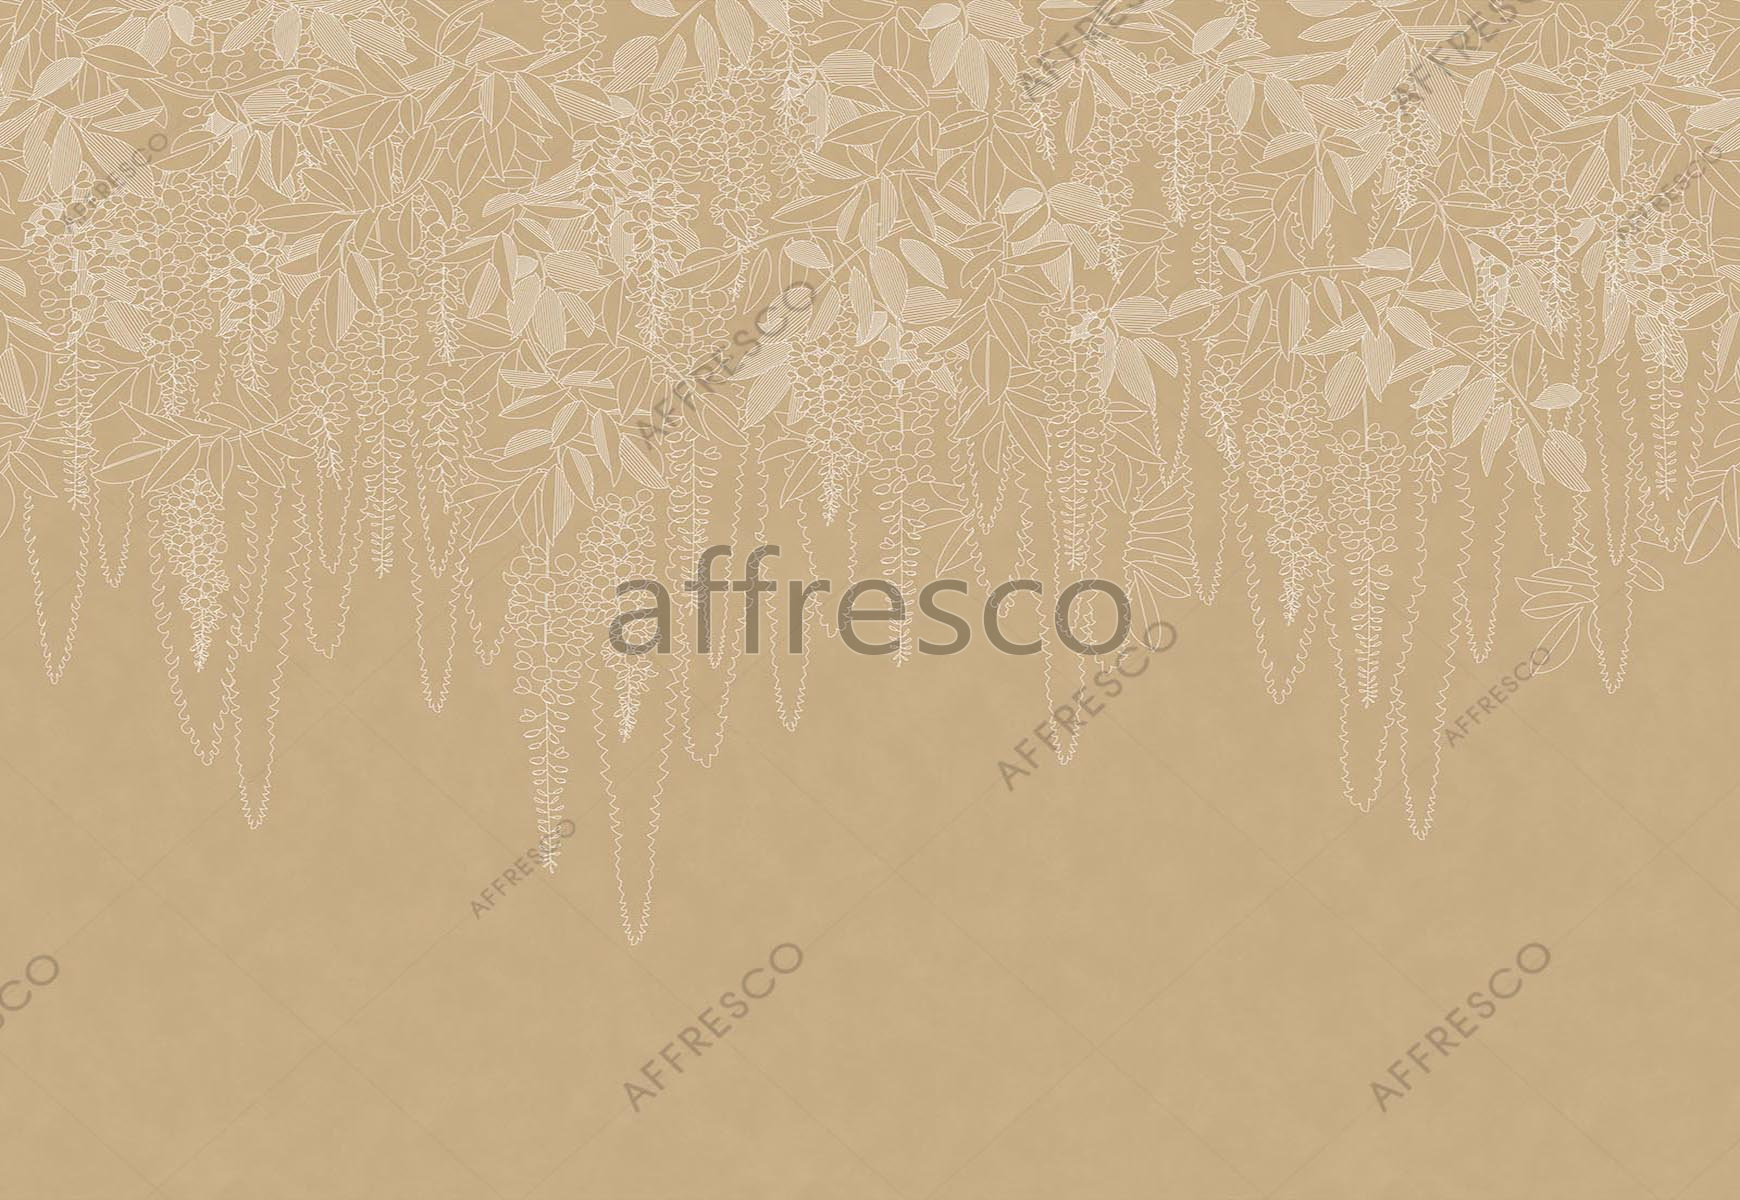 ID139204 | Forest | flower bunches | Affresco Factory